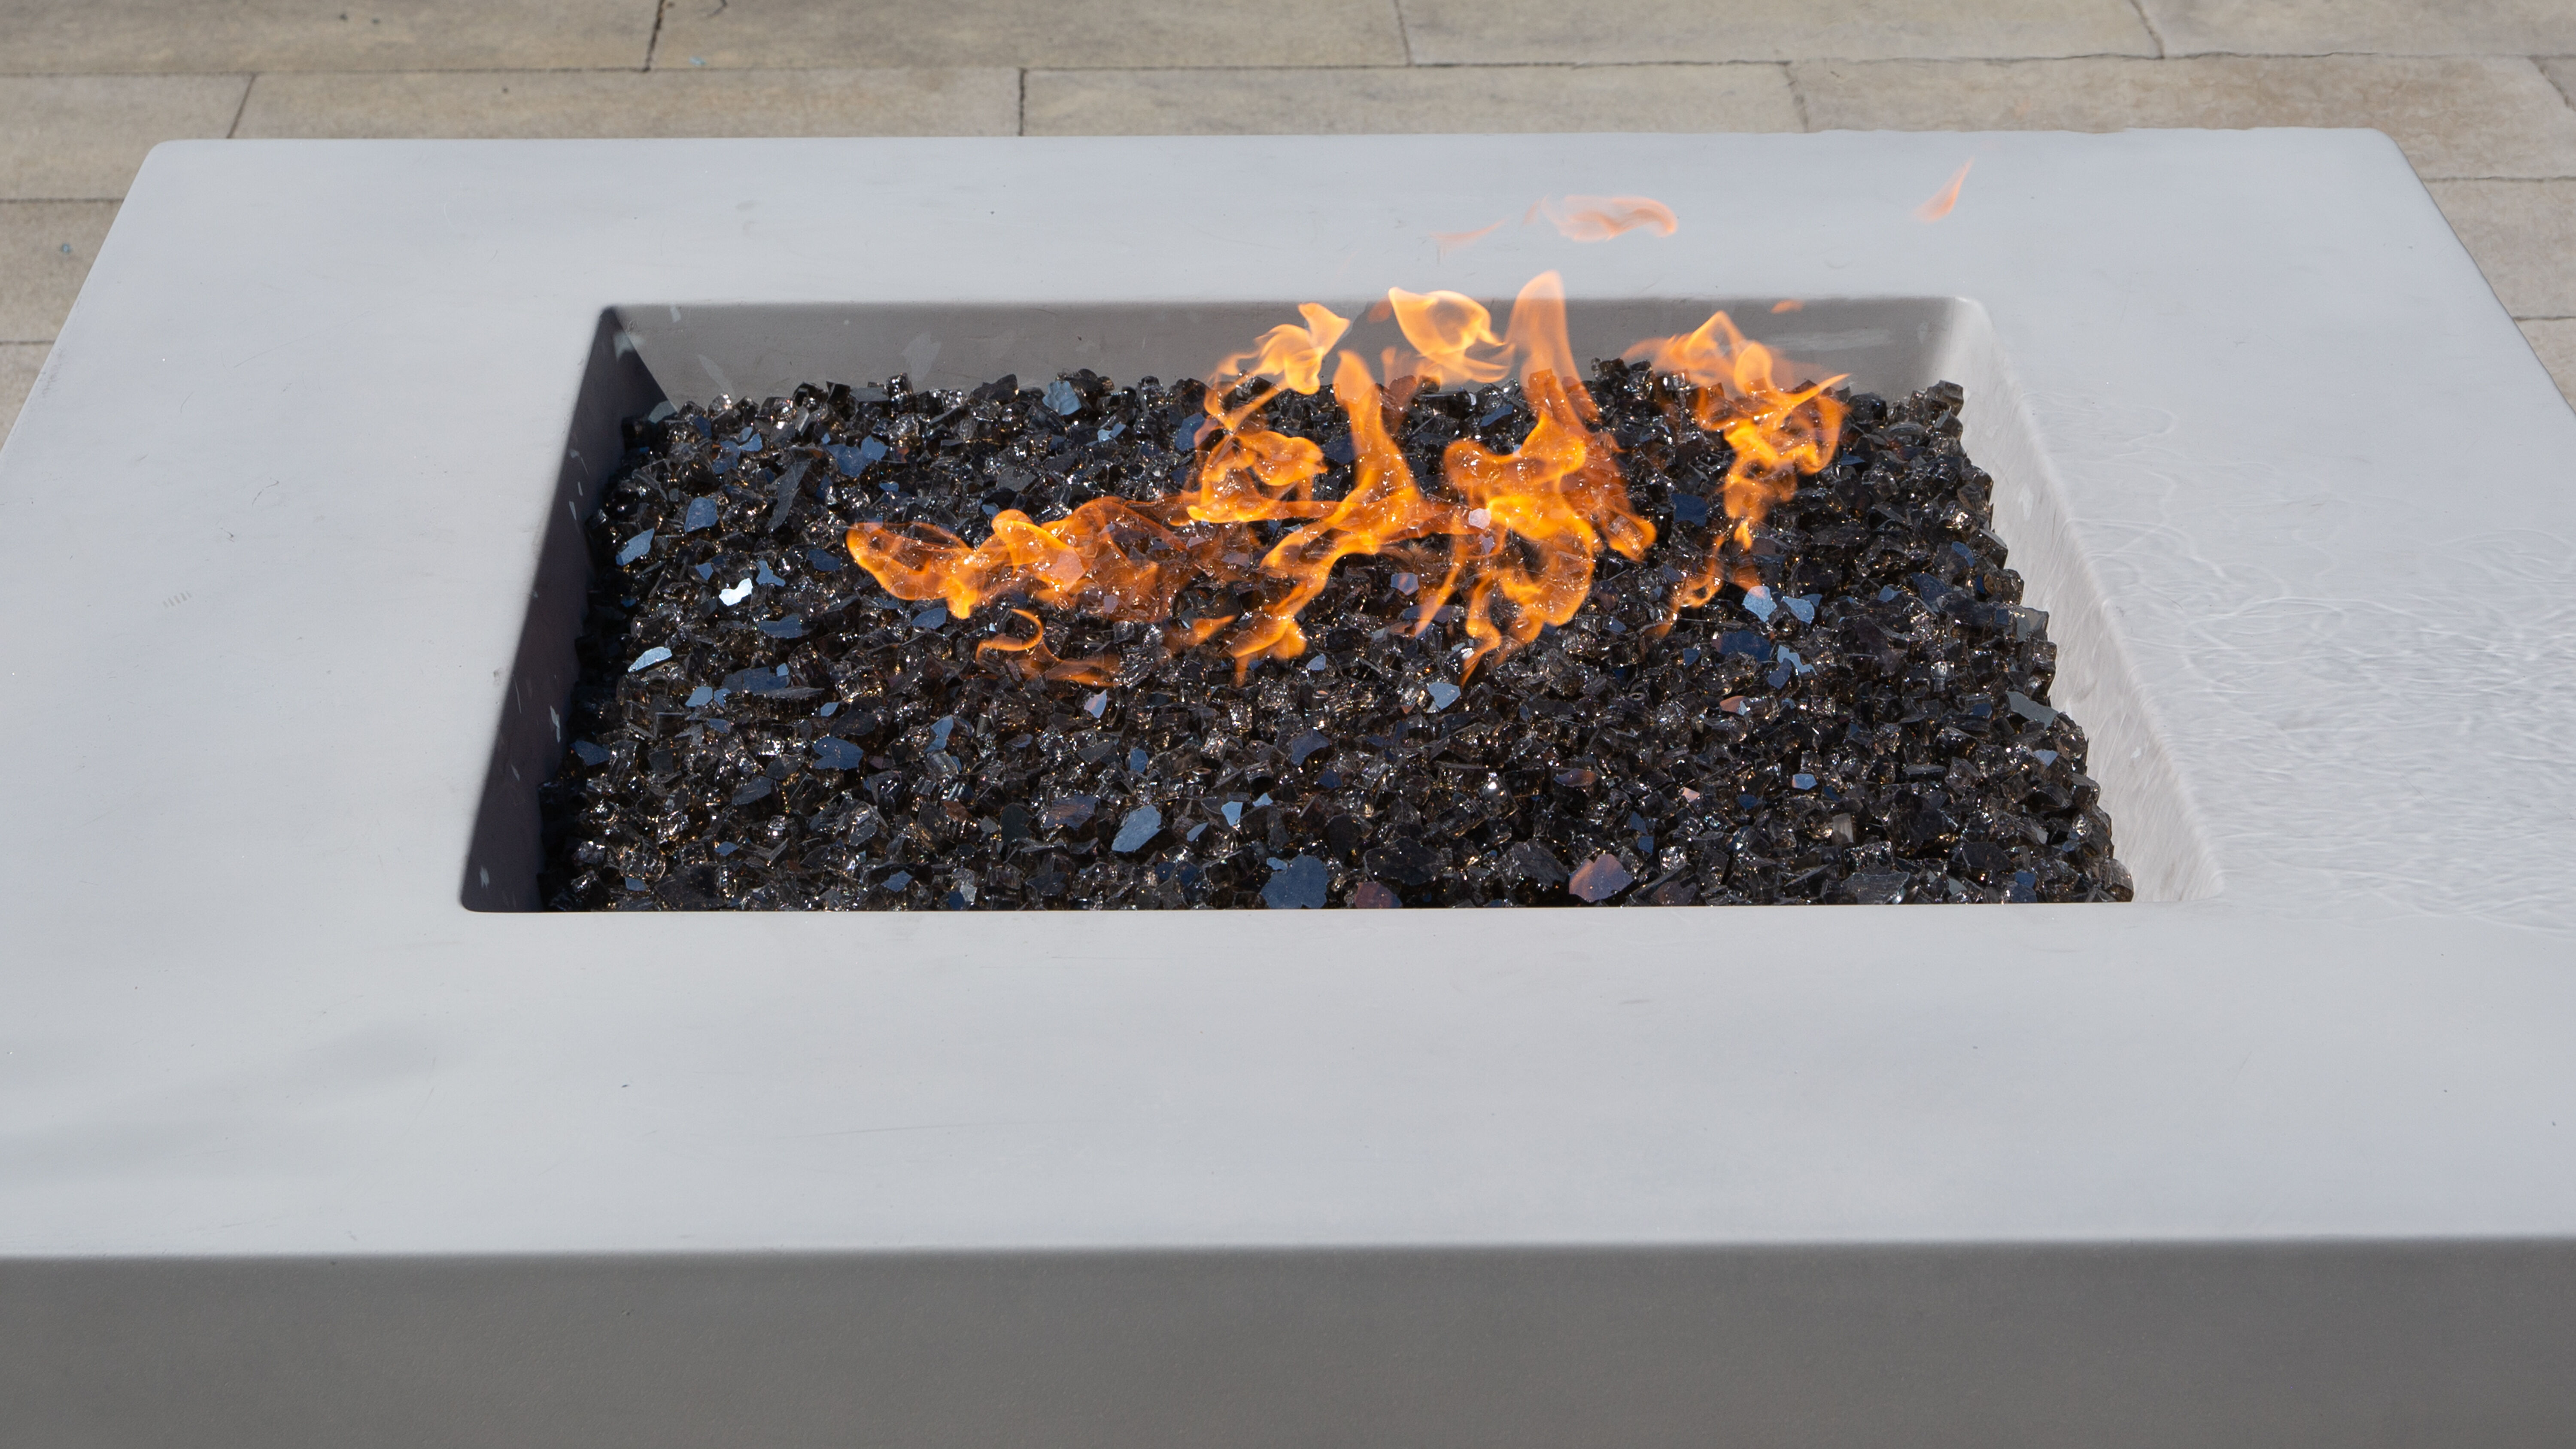 An aerial view of a light gray Quadro gas fire pit by FlameCraft with black reflective fire glass media and orange flames.